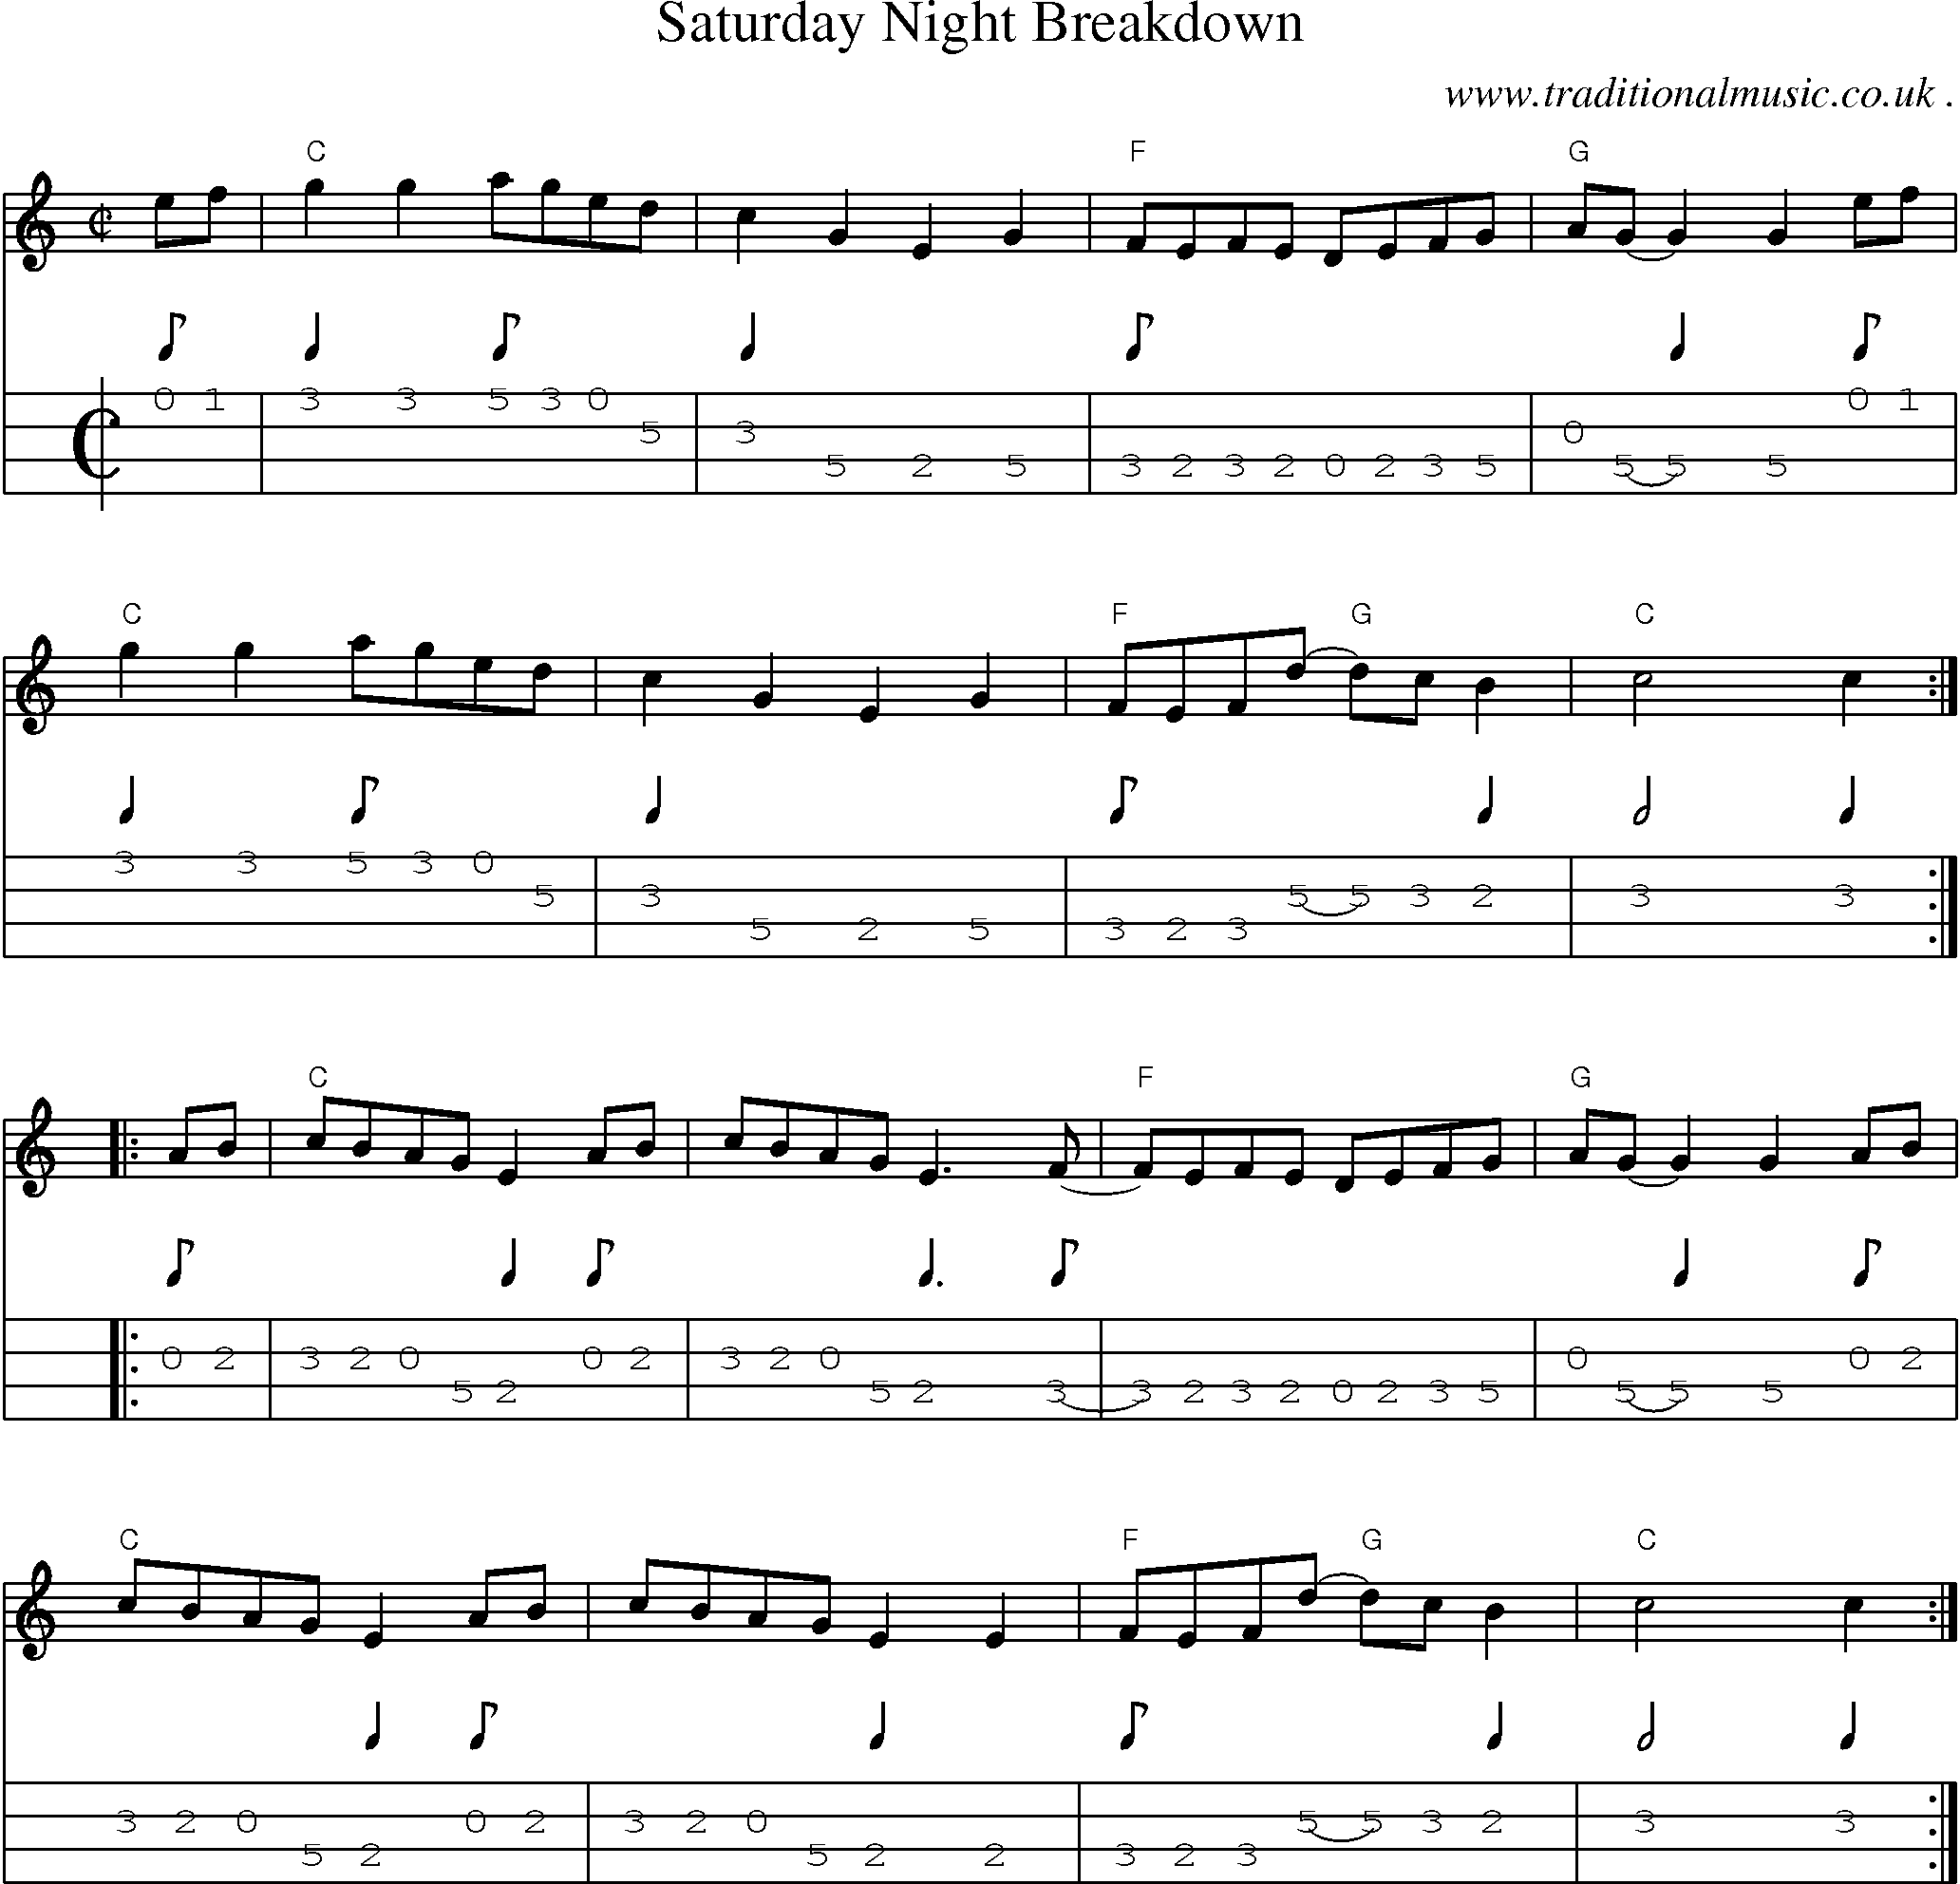 Music Score and Guitar Tabs for Saturday Night Breakdown